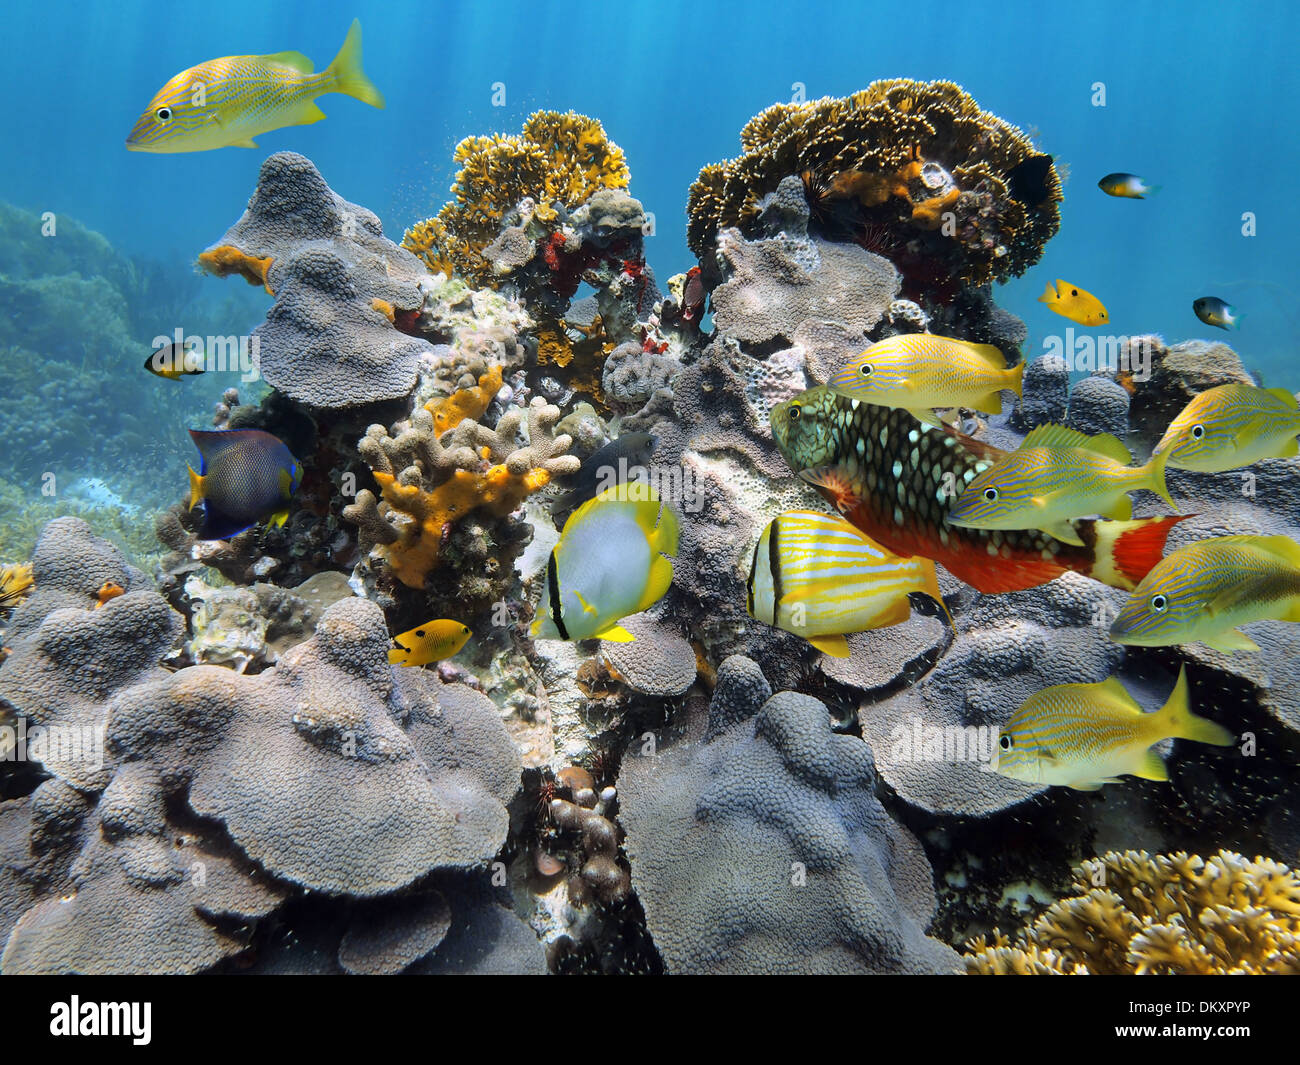 Under water scene with healthy coral and colorful reef fish, Caribbean sea, Belize Stock Photo